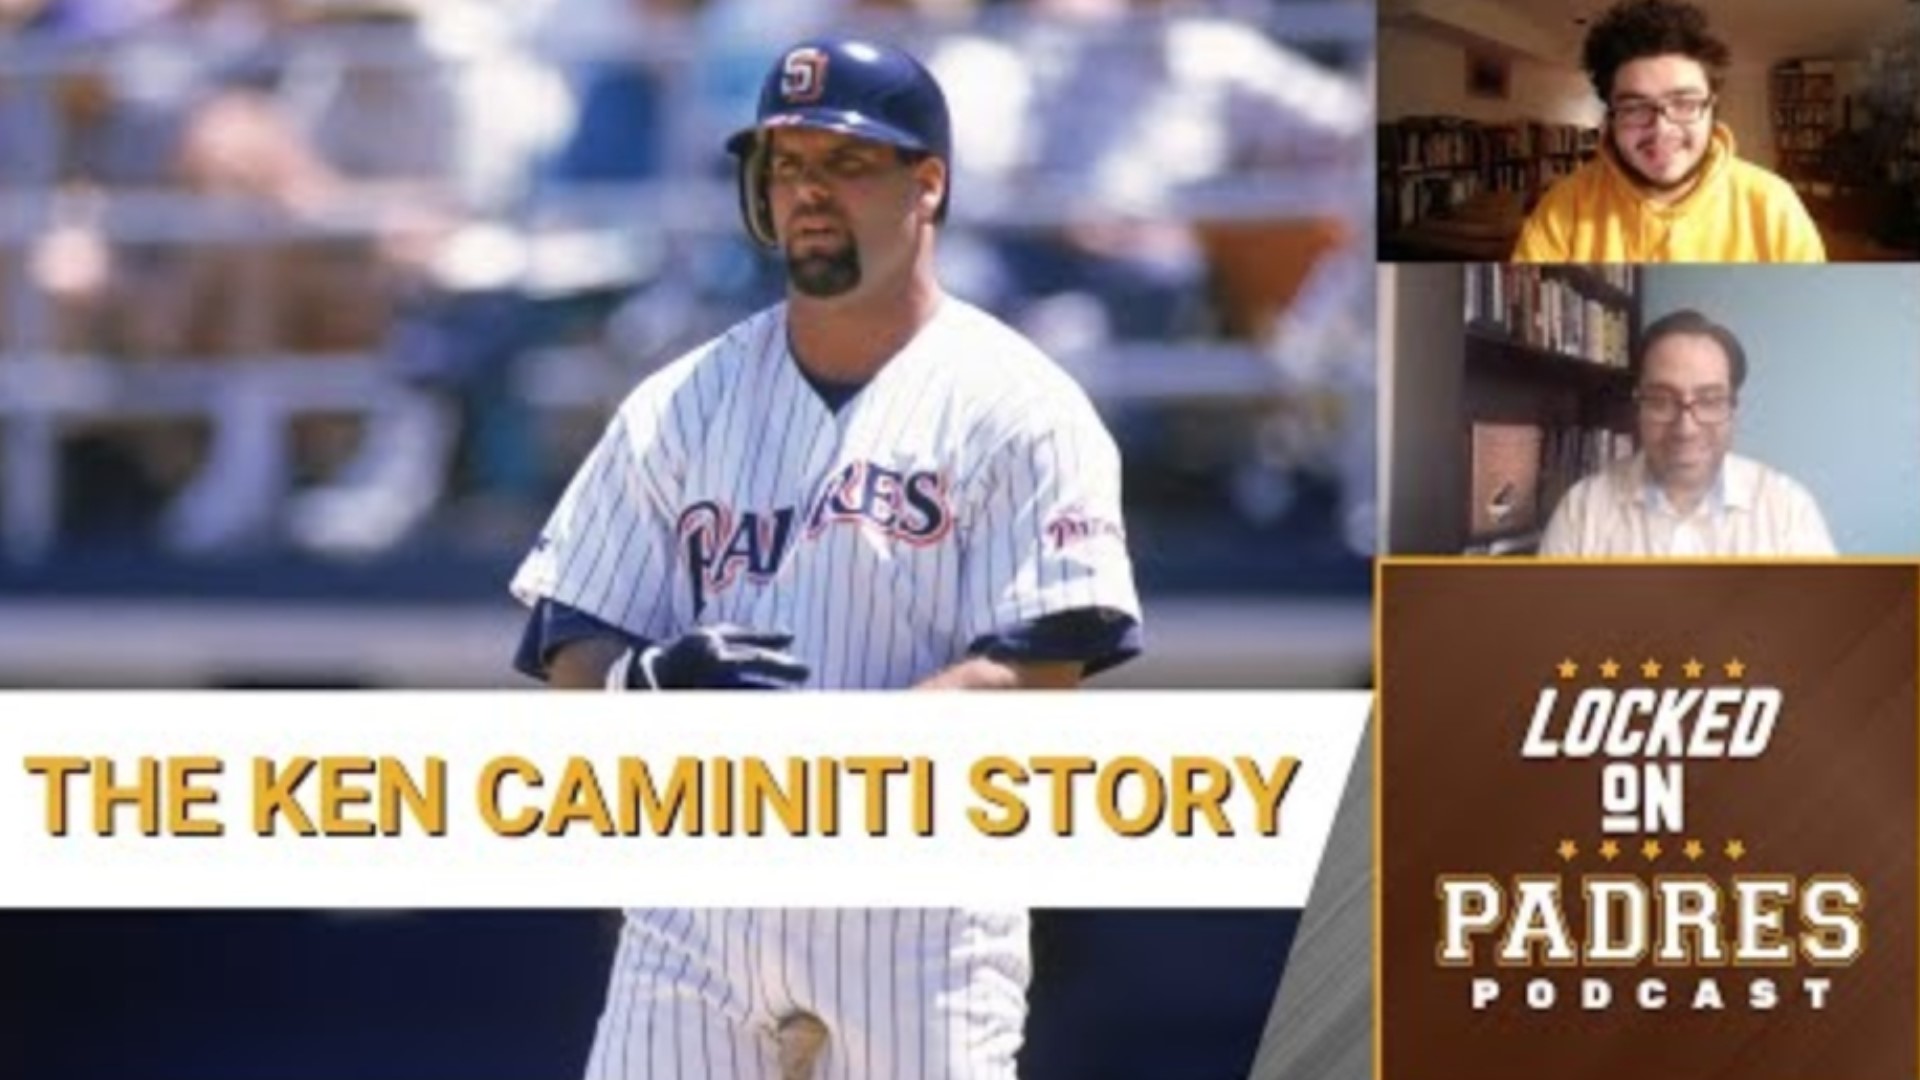 Author Dan Good discusses the process of writing the book, what makes Ken Caminiti's story so profound, the steroids era and the late 90s Padres teams.